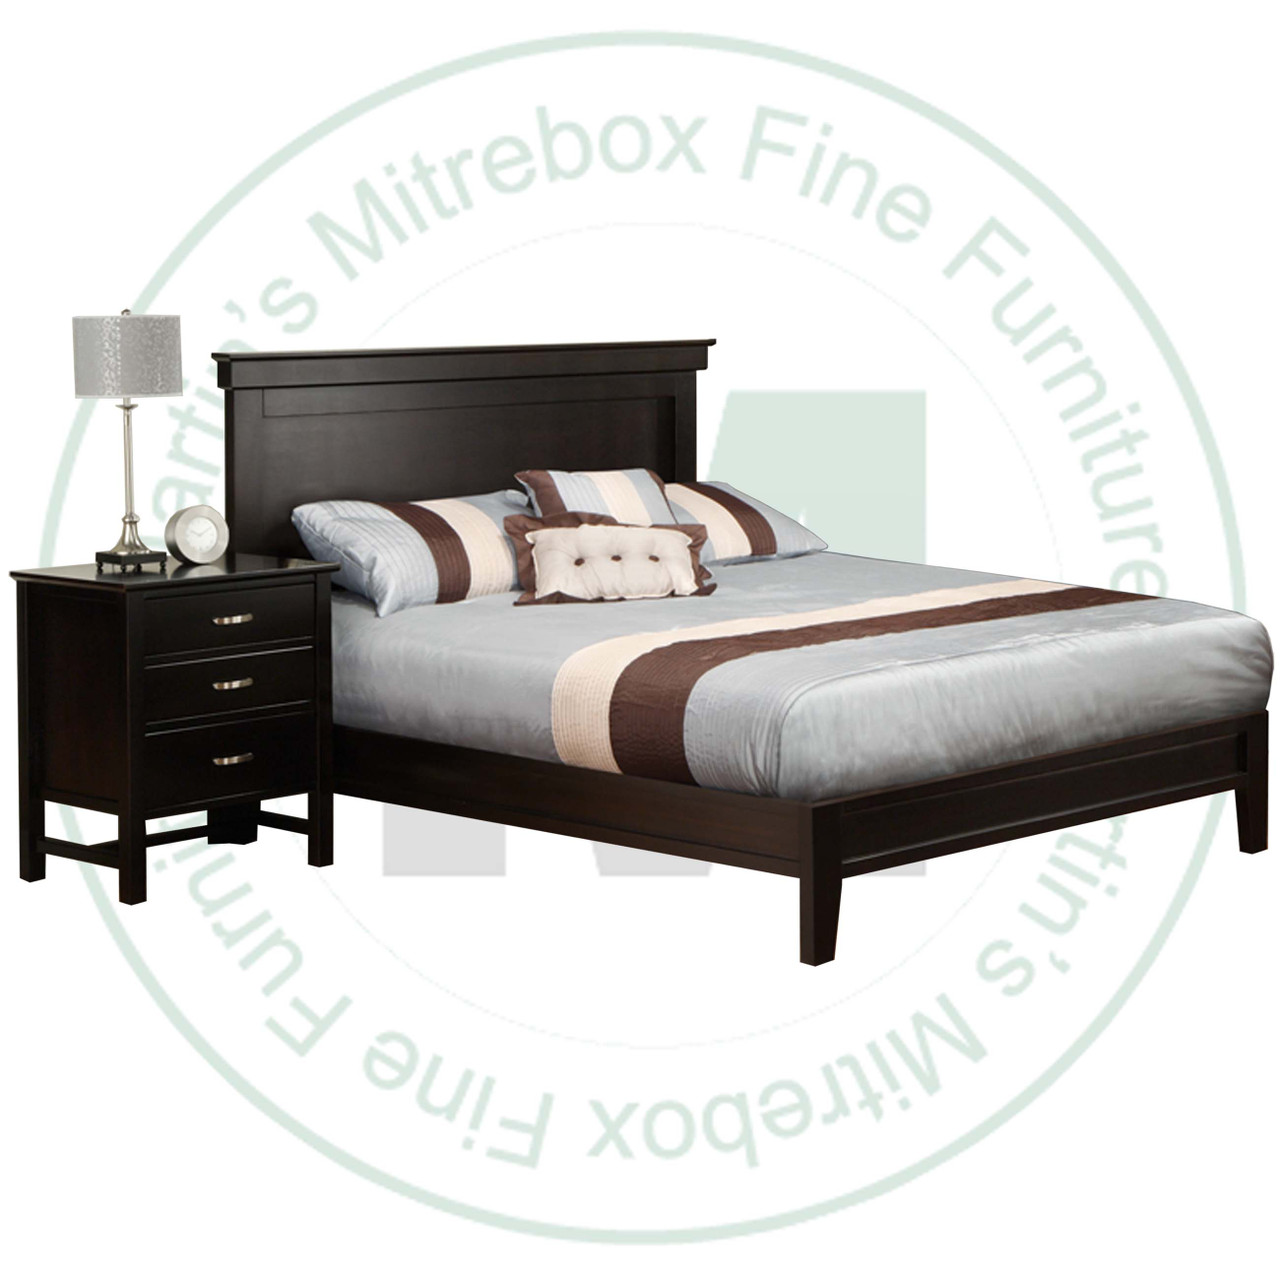 Oak Brooklyn Double Bed With a Wraparound Footboard